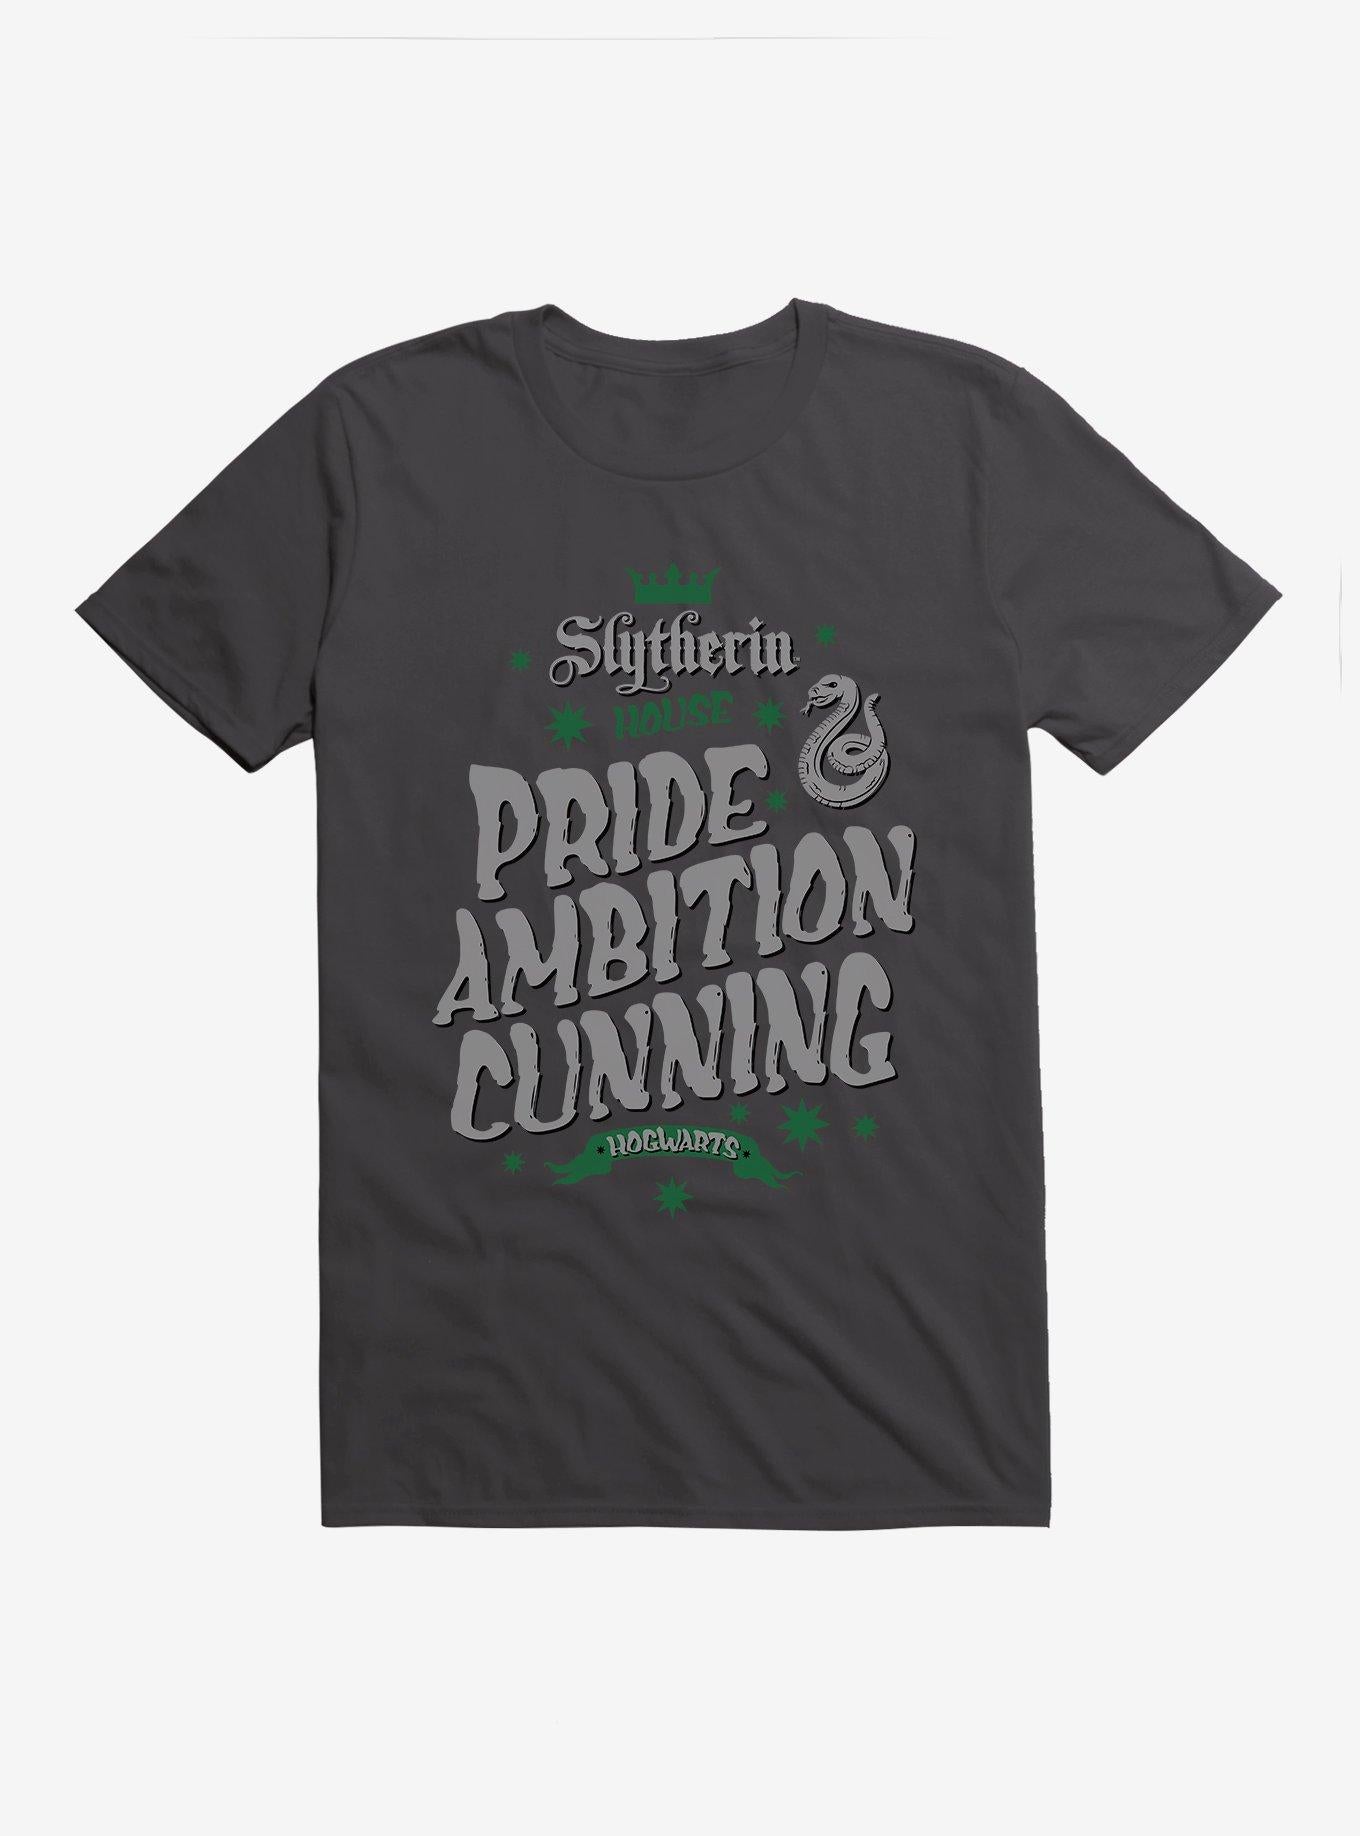 Express Your Hogwarts House Pride With A 'Mind If I Slytherin' Shirt